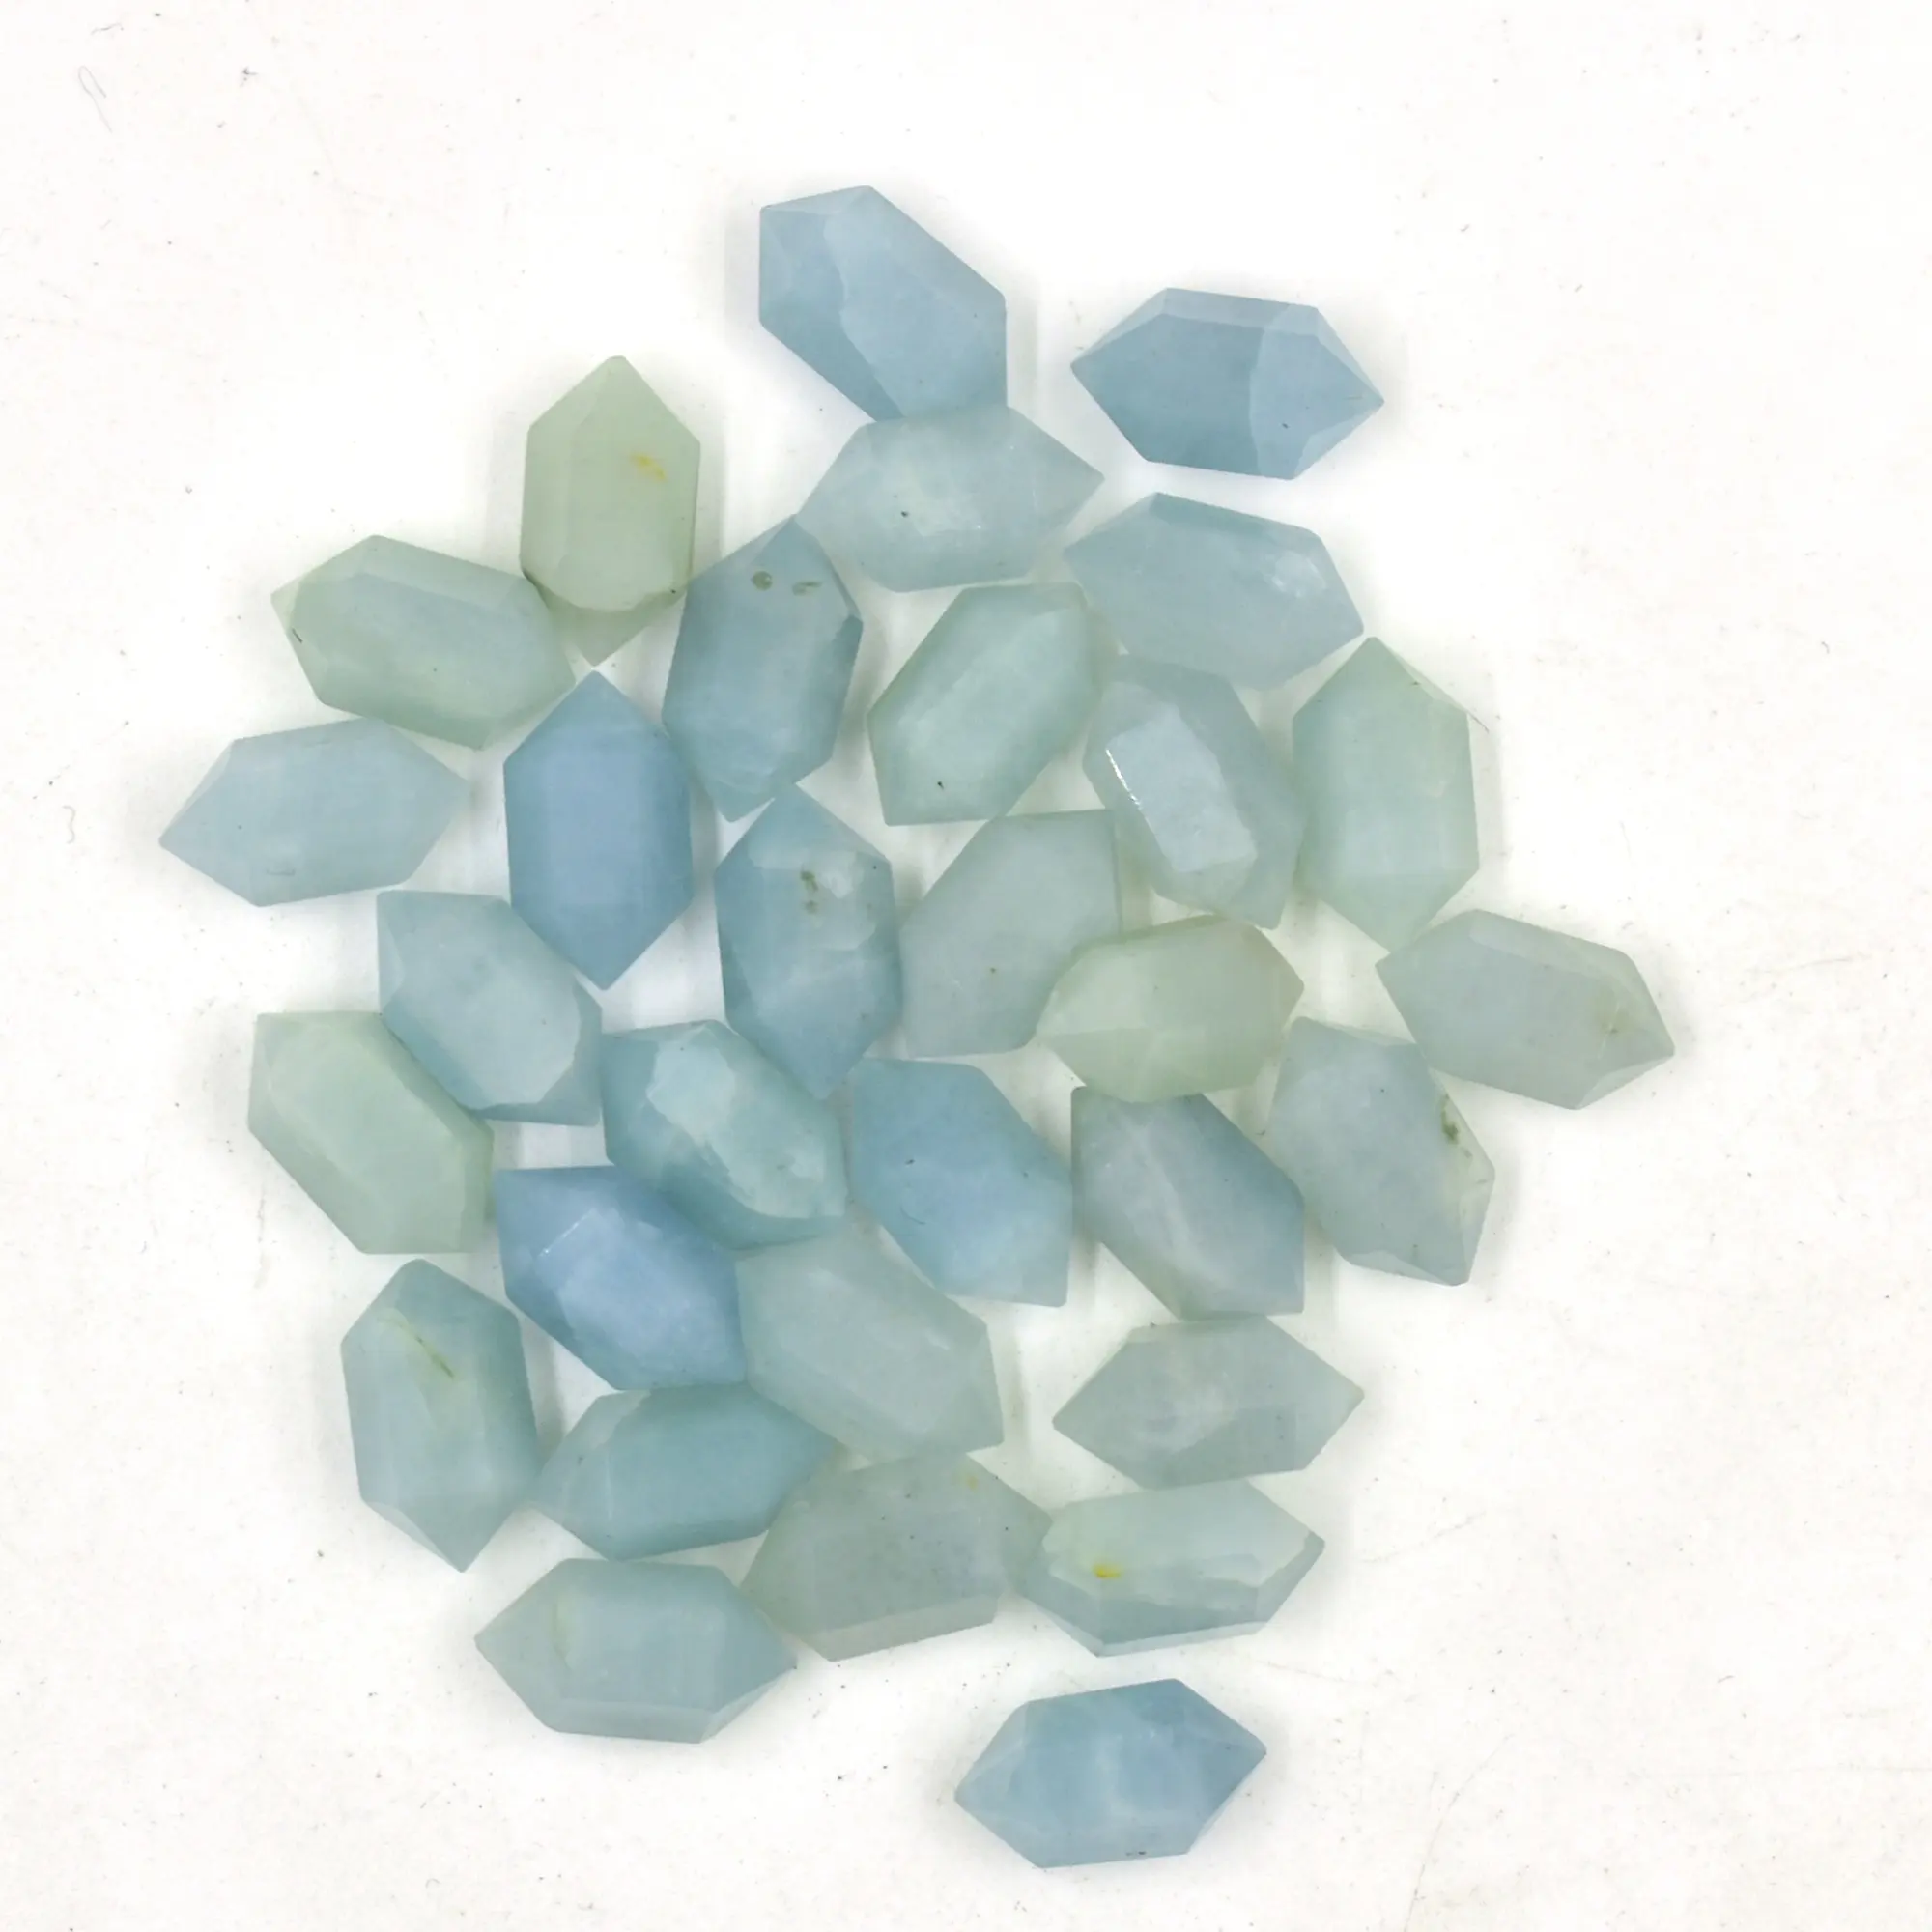 Natural Aquamarine Small Pointers For Pendant, Double Terminated Pointers For Making Charm & Earrings, Small Aquamarine Points